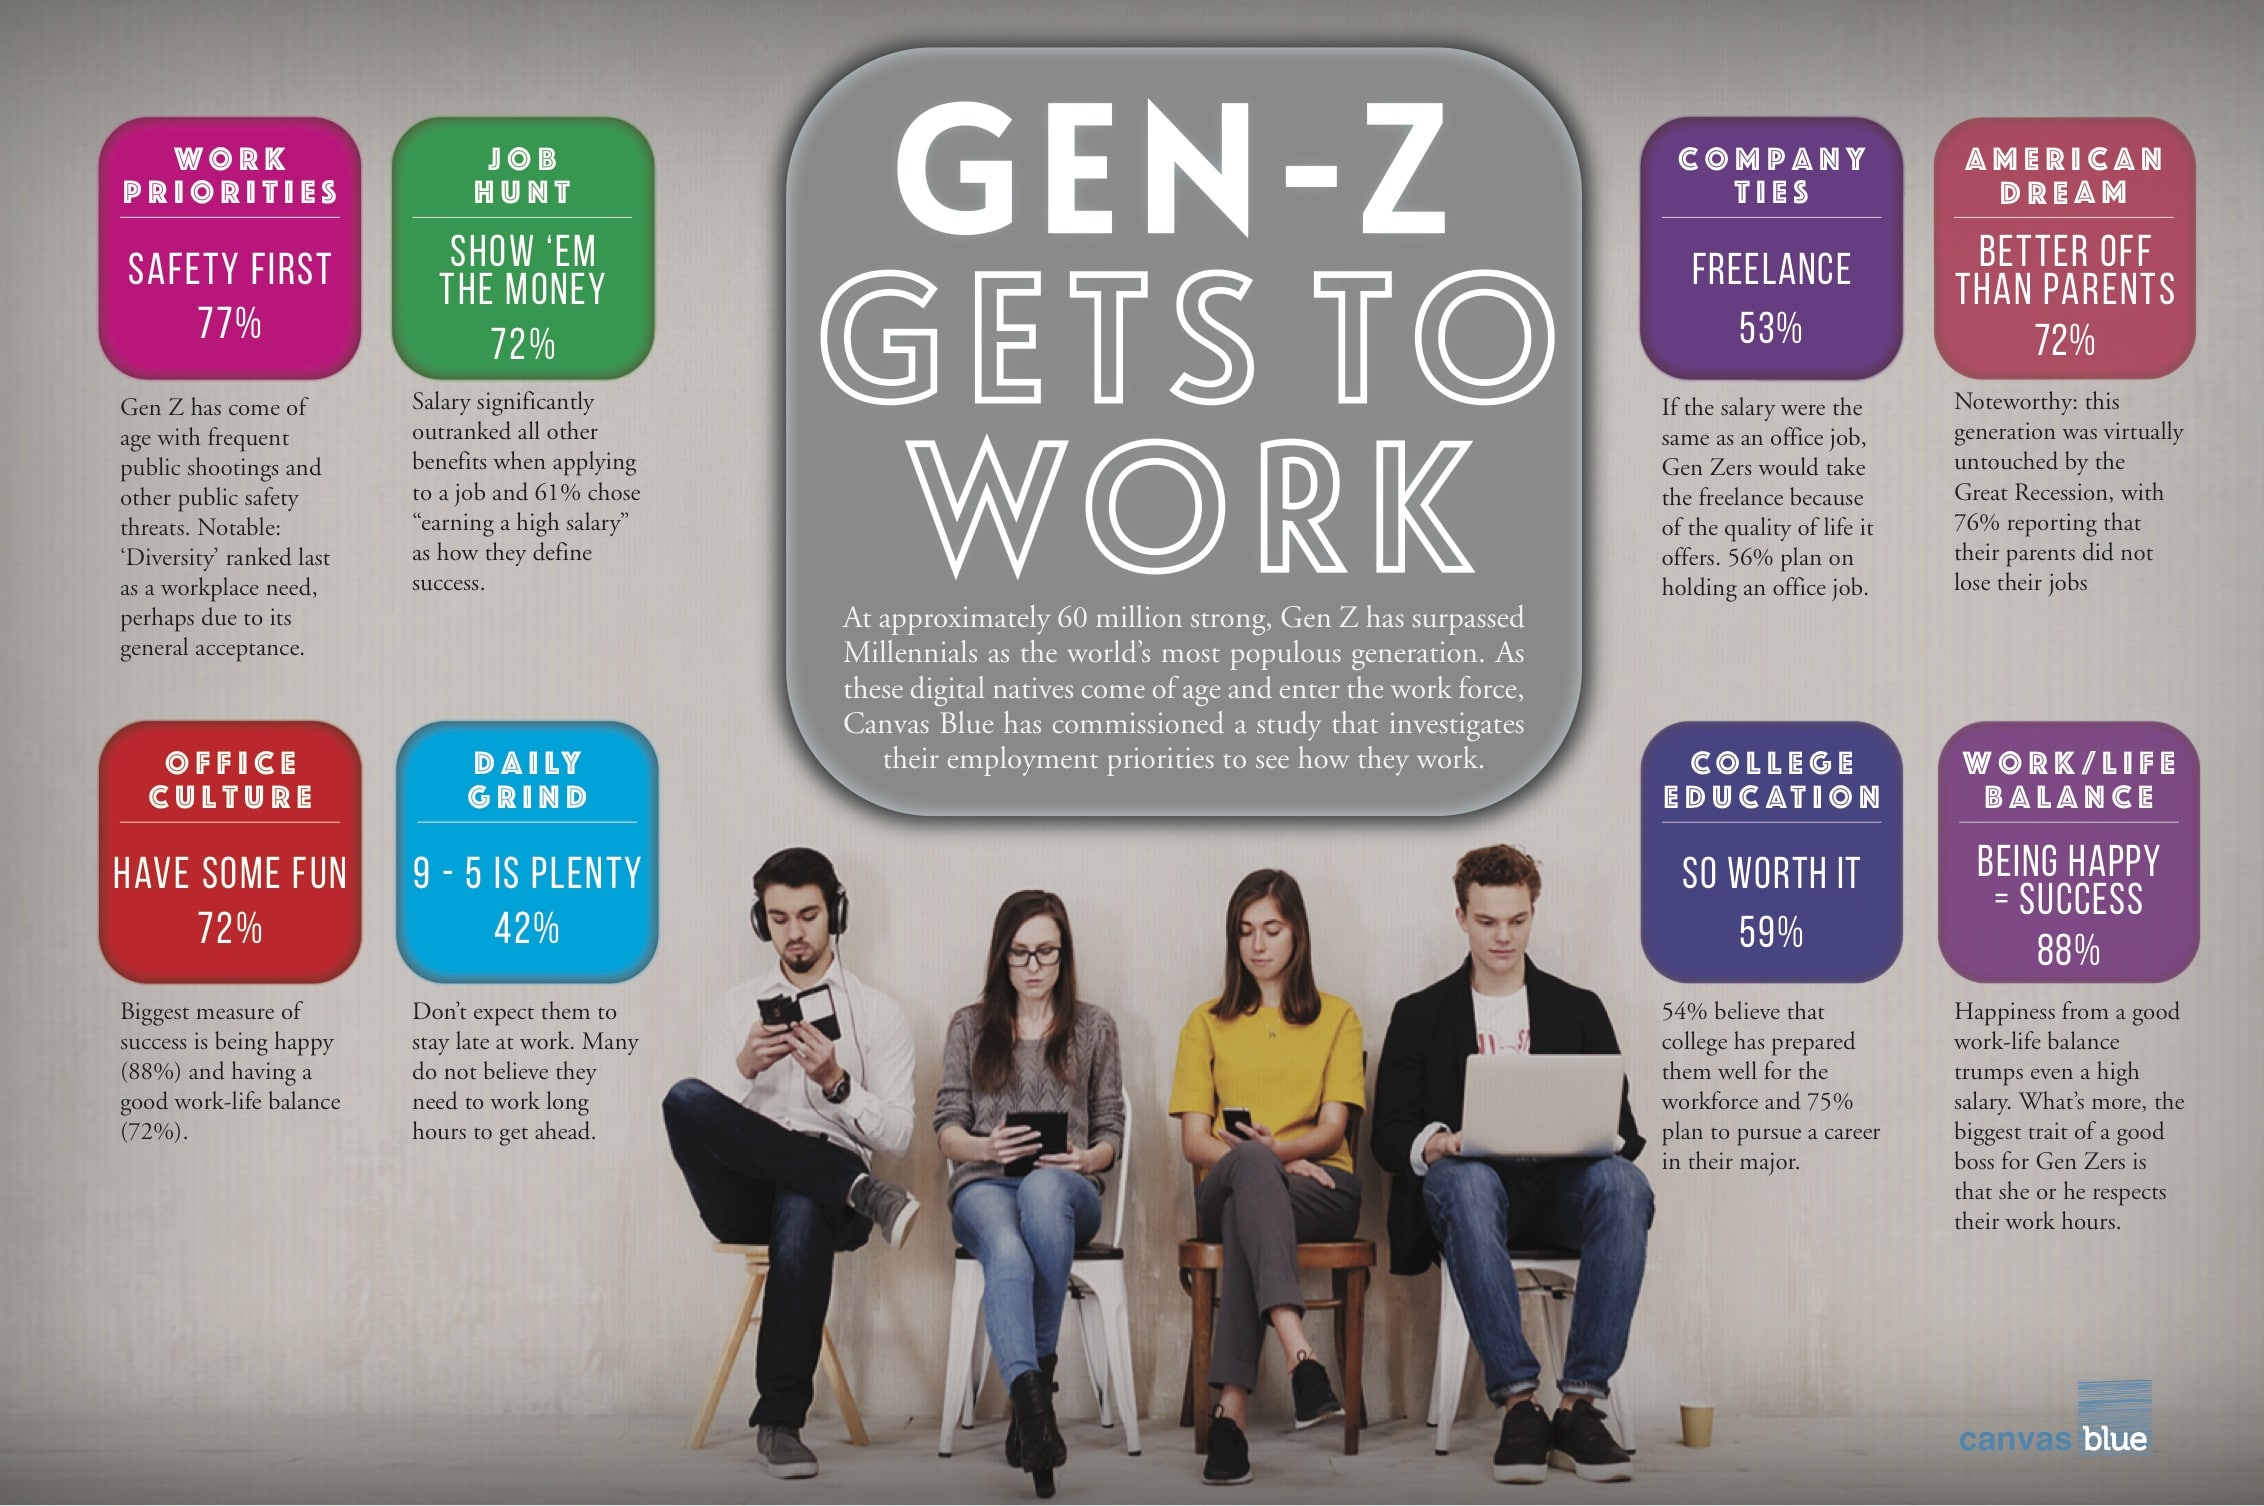 Welcome to the salt mines! Gen Z prepares for its workplace debut